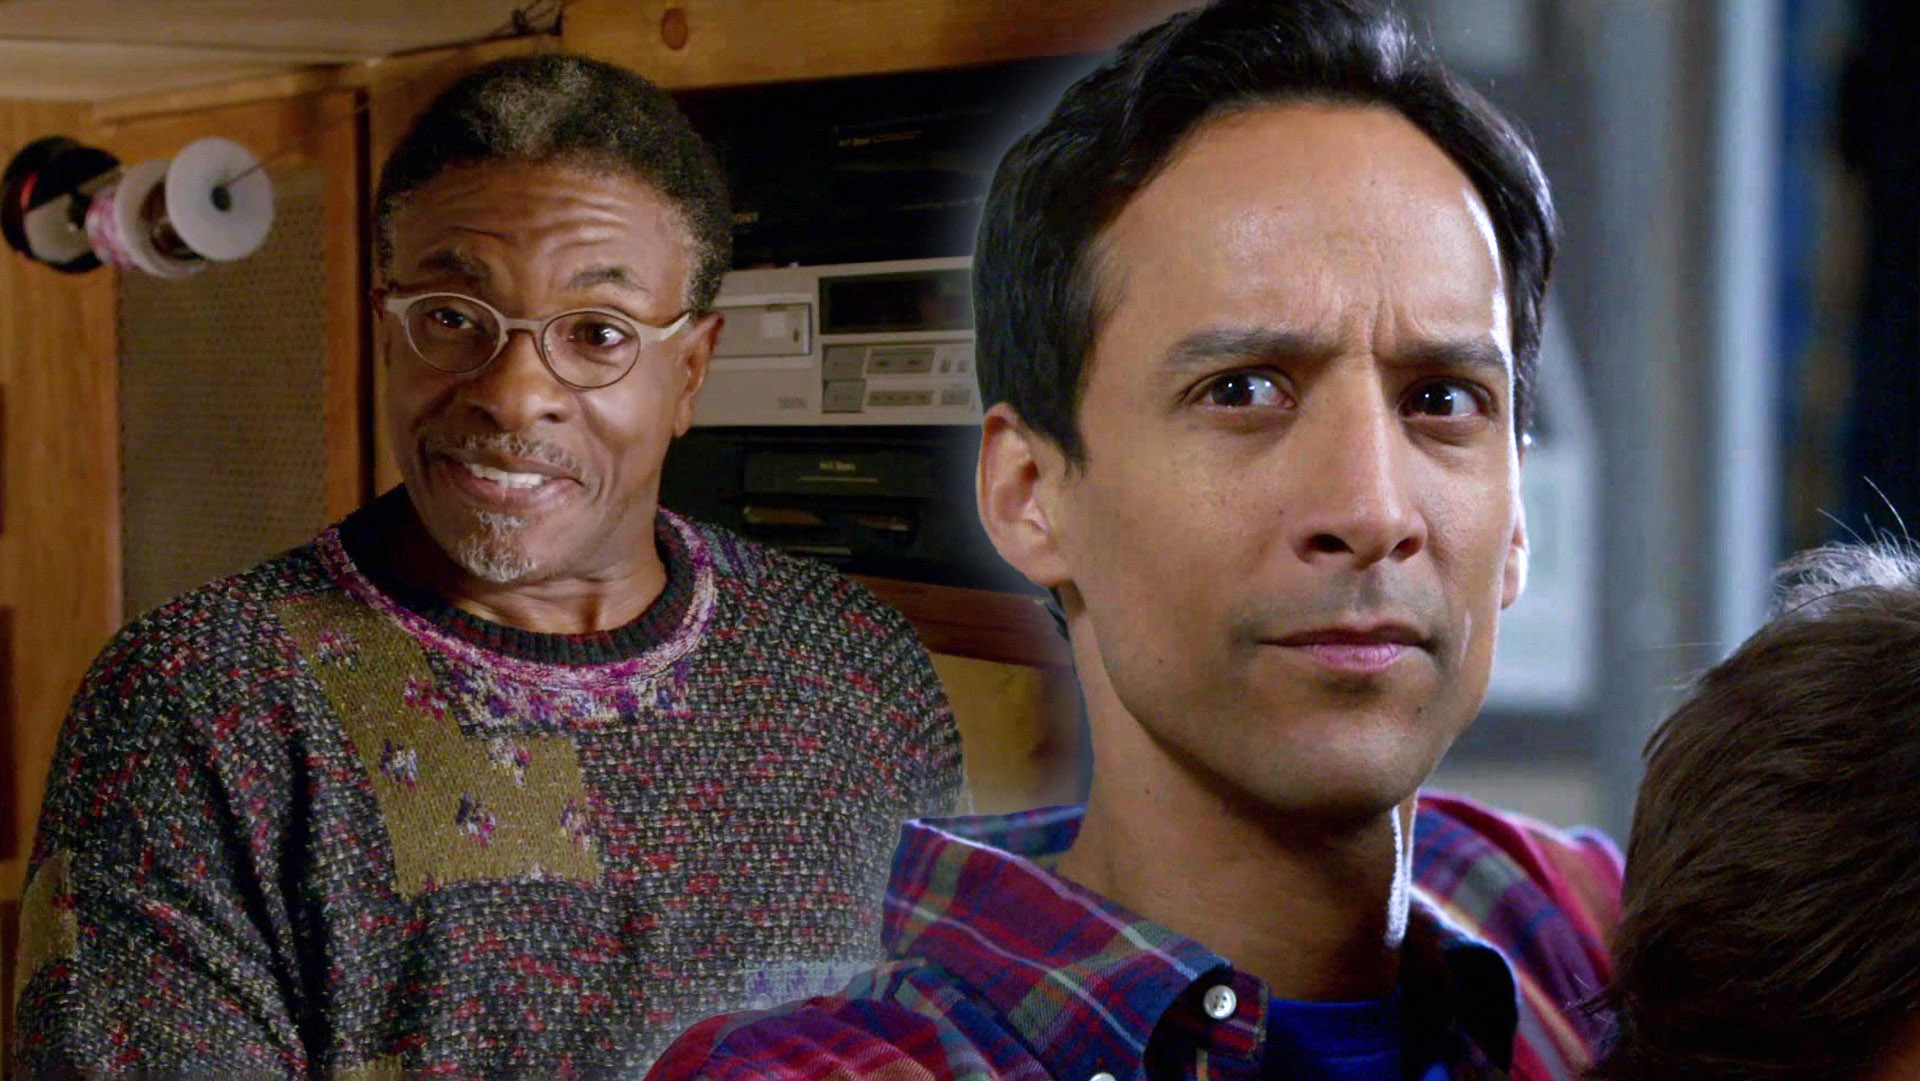 Community Movie Is Happening: the Show's Star Encourages Optimism Among Fans